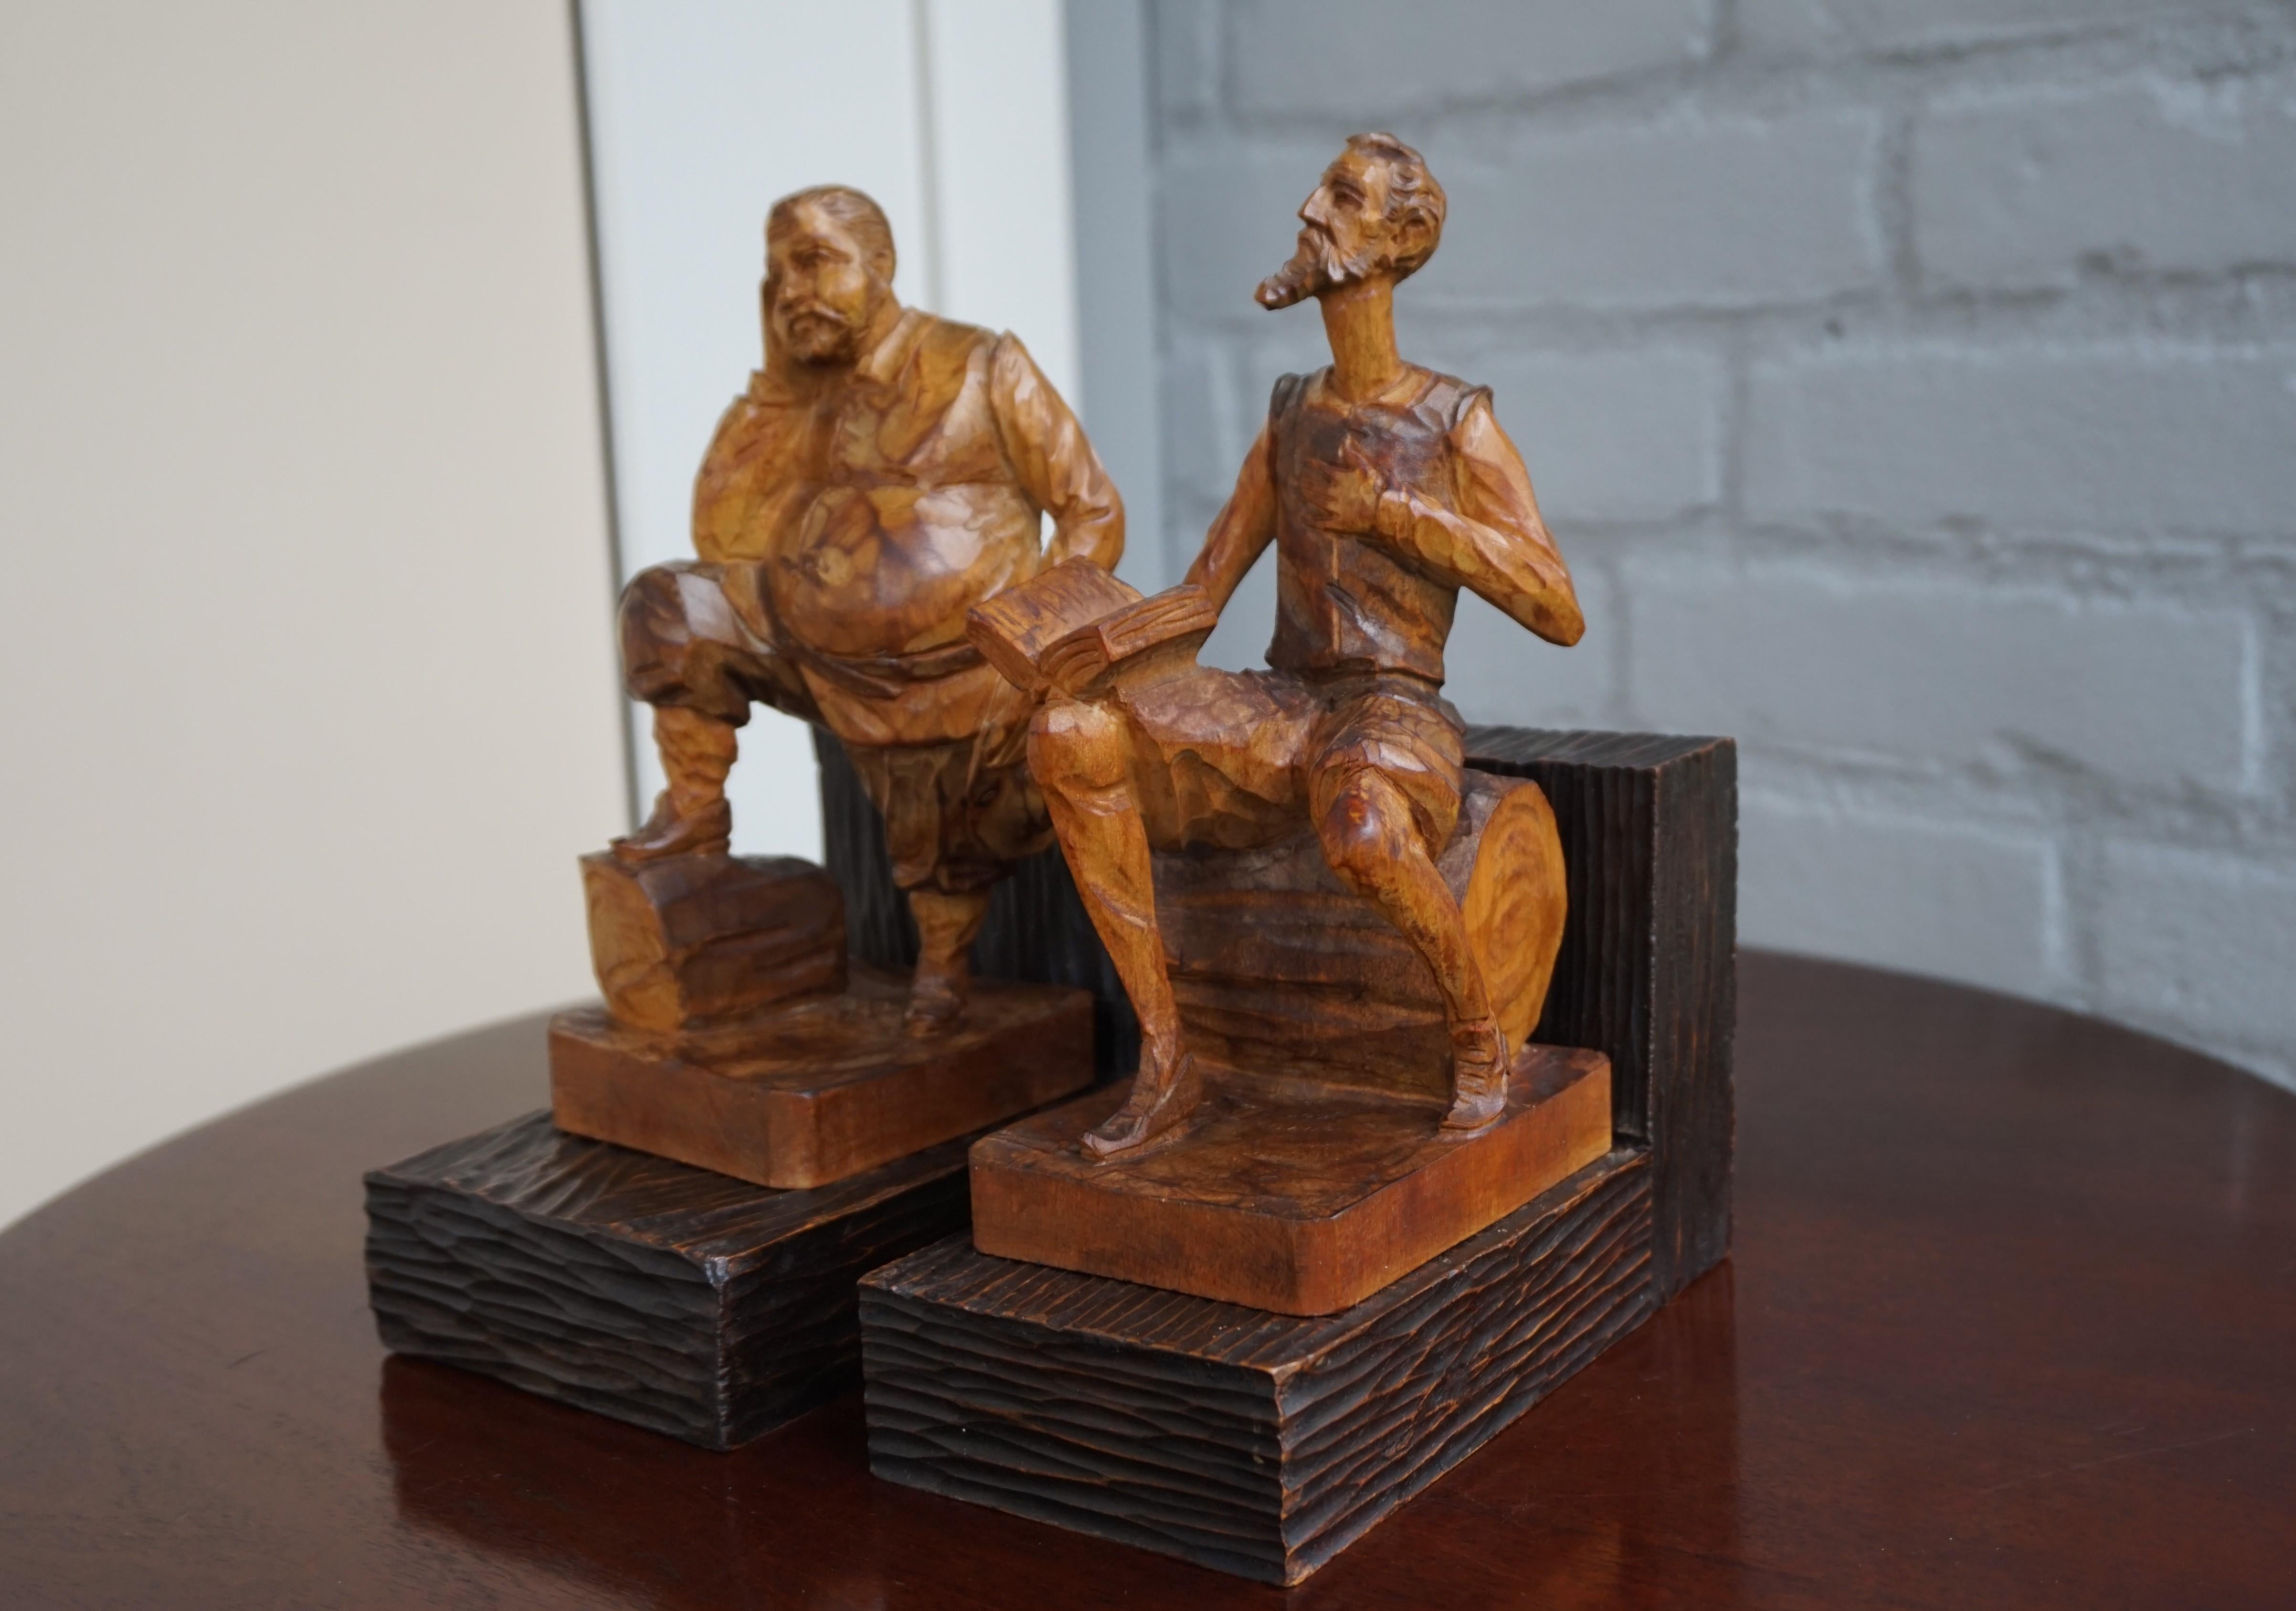 Rare, very well carved and mint condition, famous novel bookends.

If you are looking for a pair of decorative, practical and very well crafted bookends then this rare pair could be gracing your home or office soon. The taller and slimmer figure